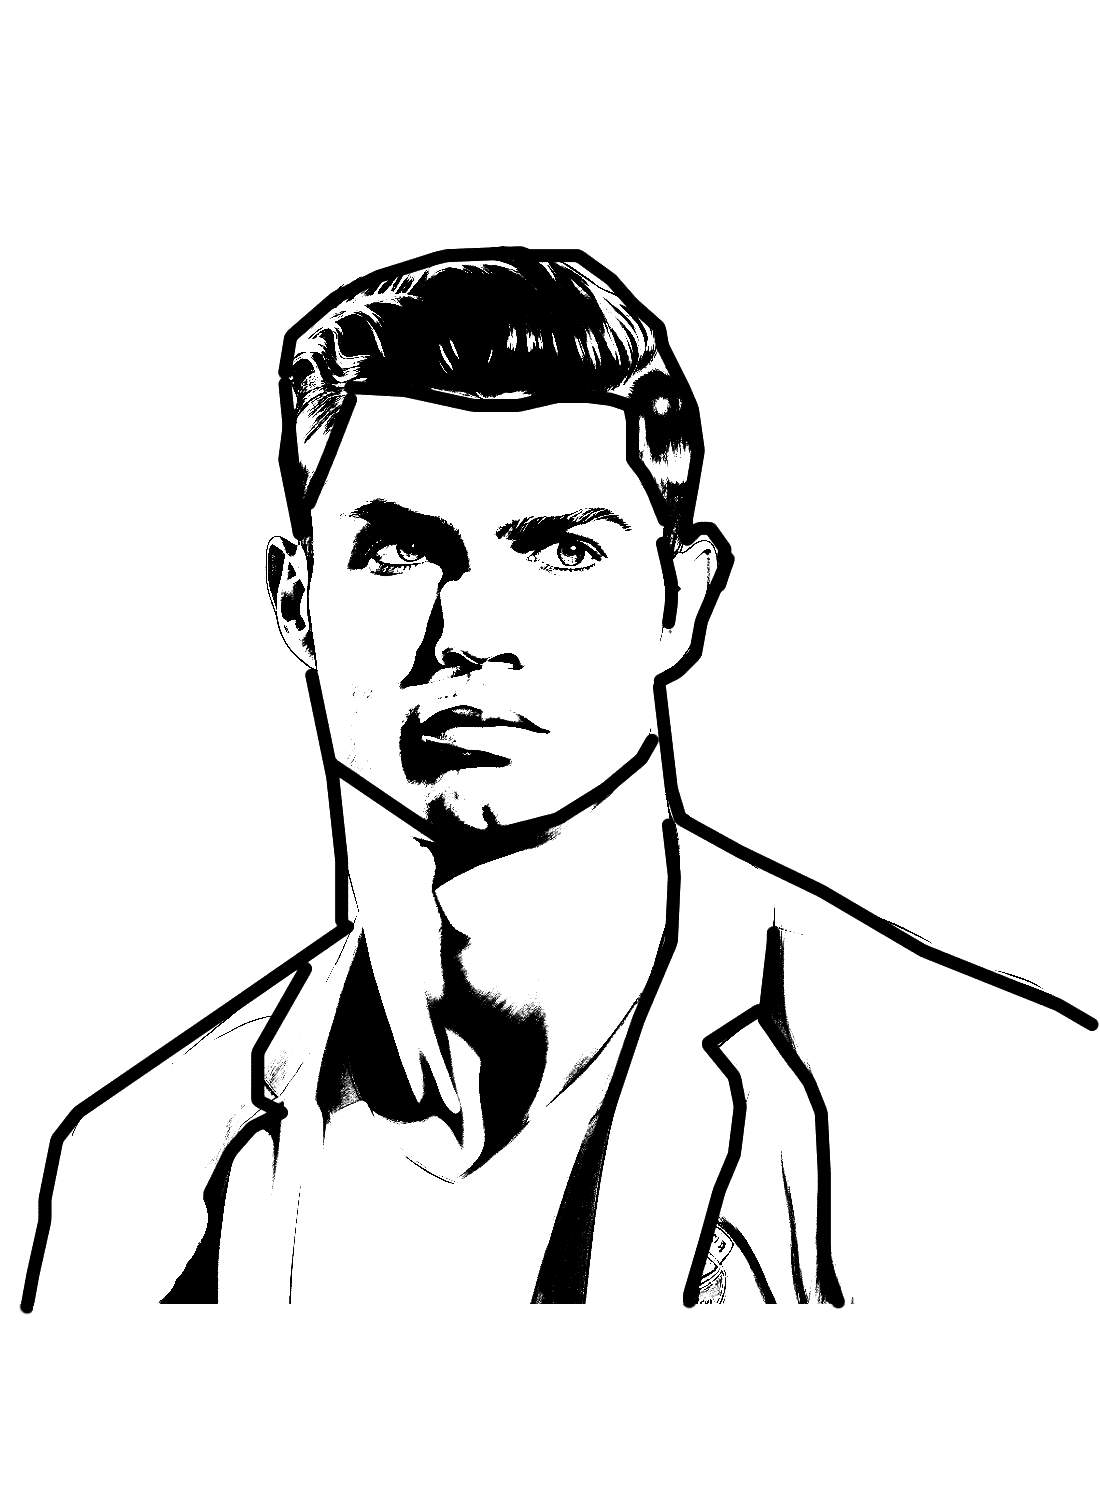 Coloring Pages To Print Of Cristiano Ronaldo from Cristiano Ronaldo